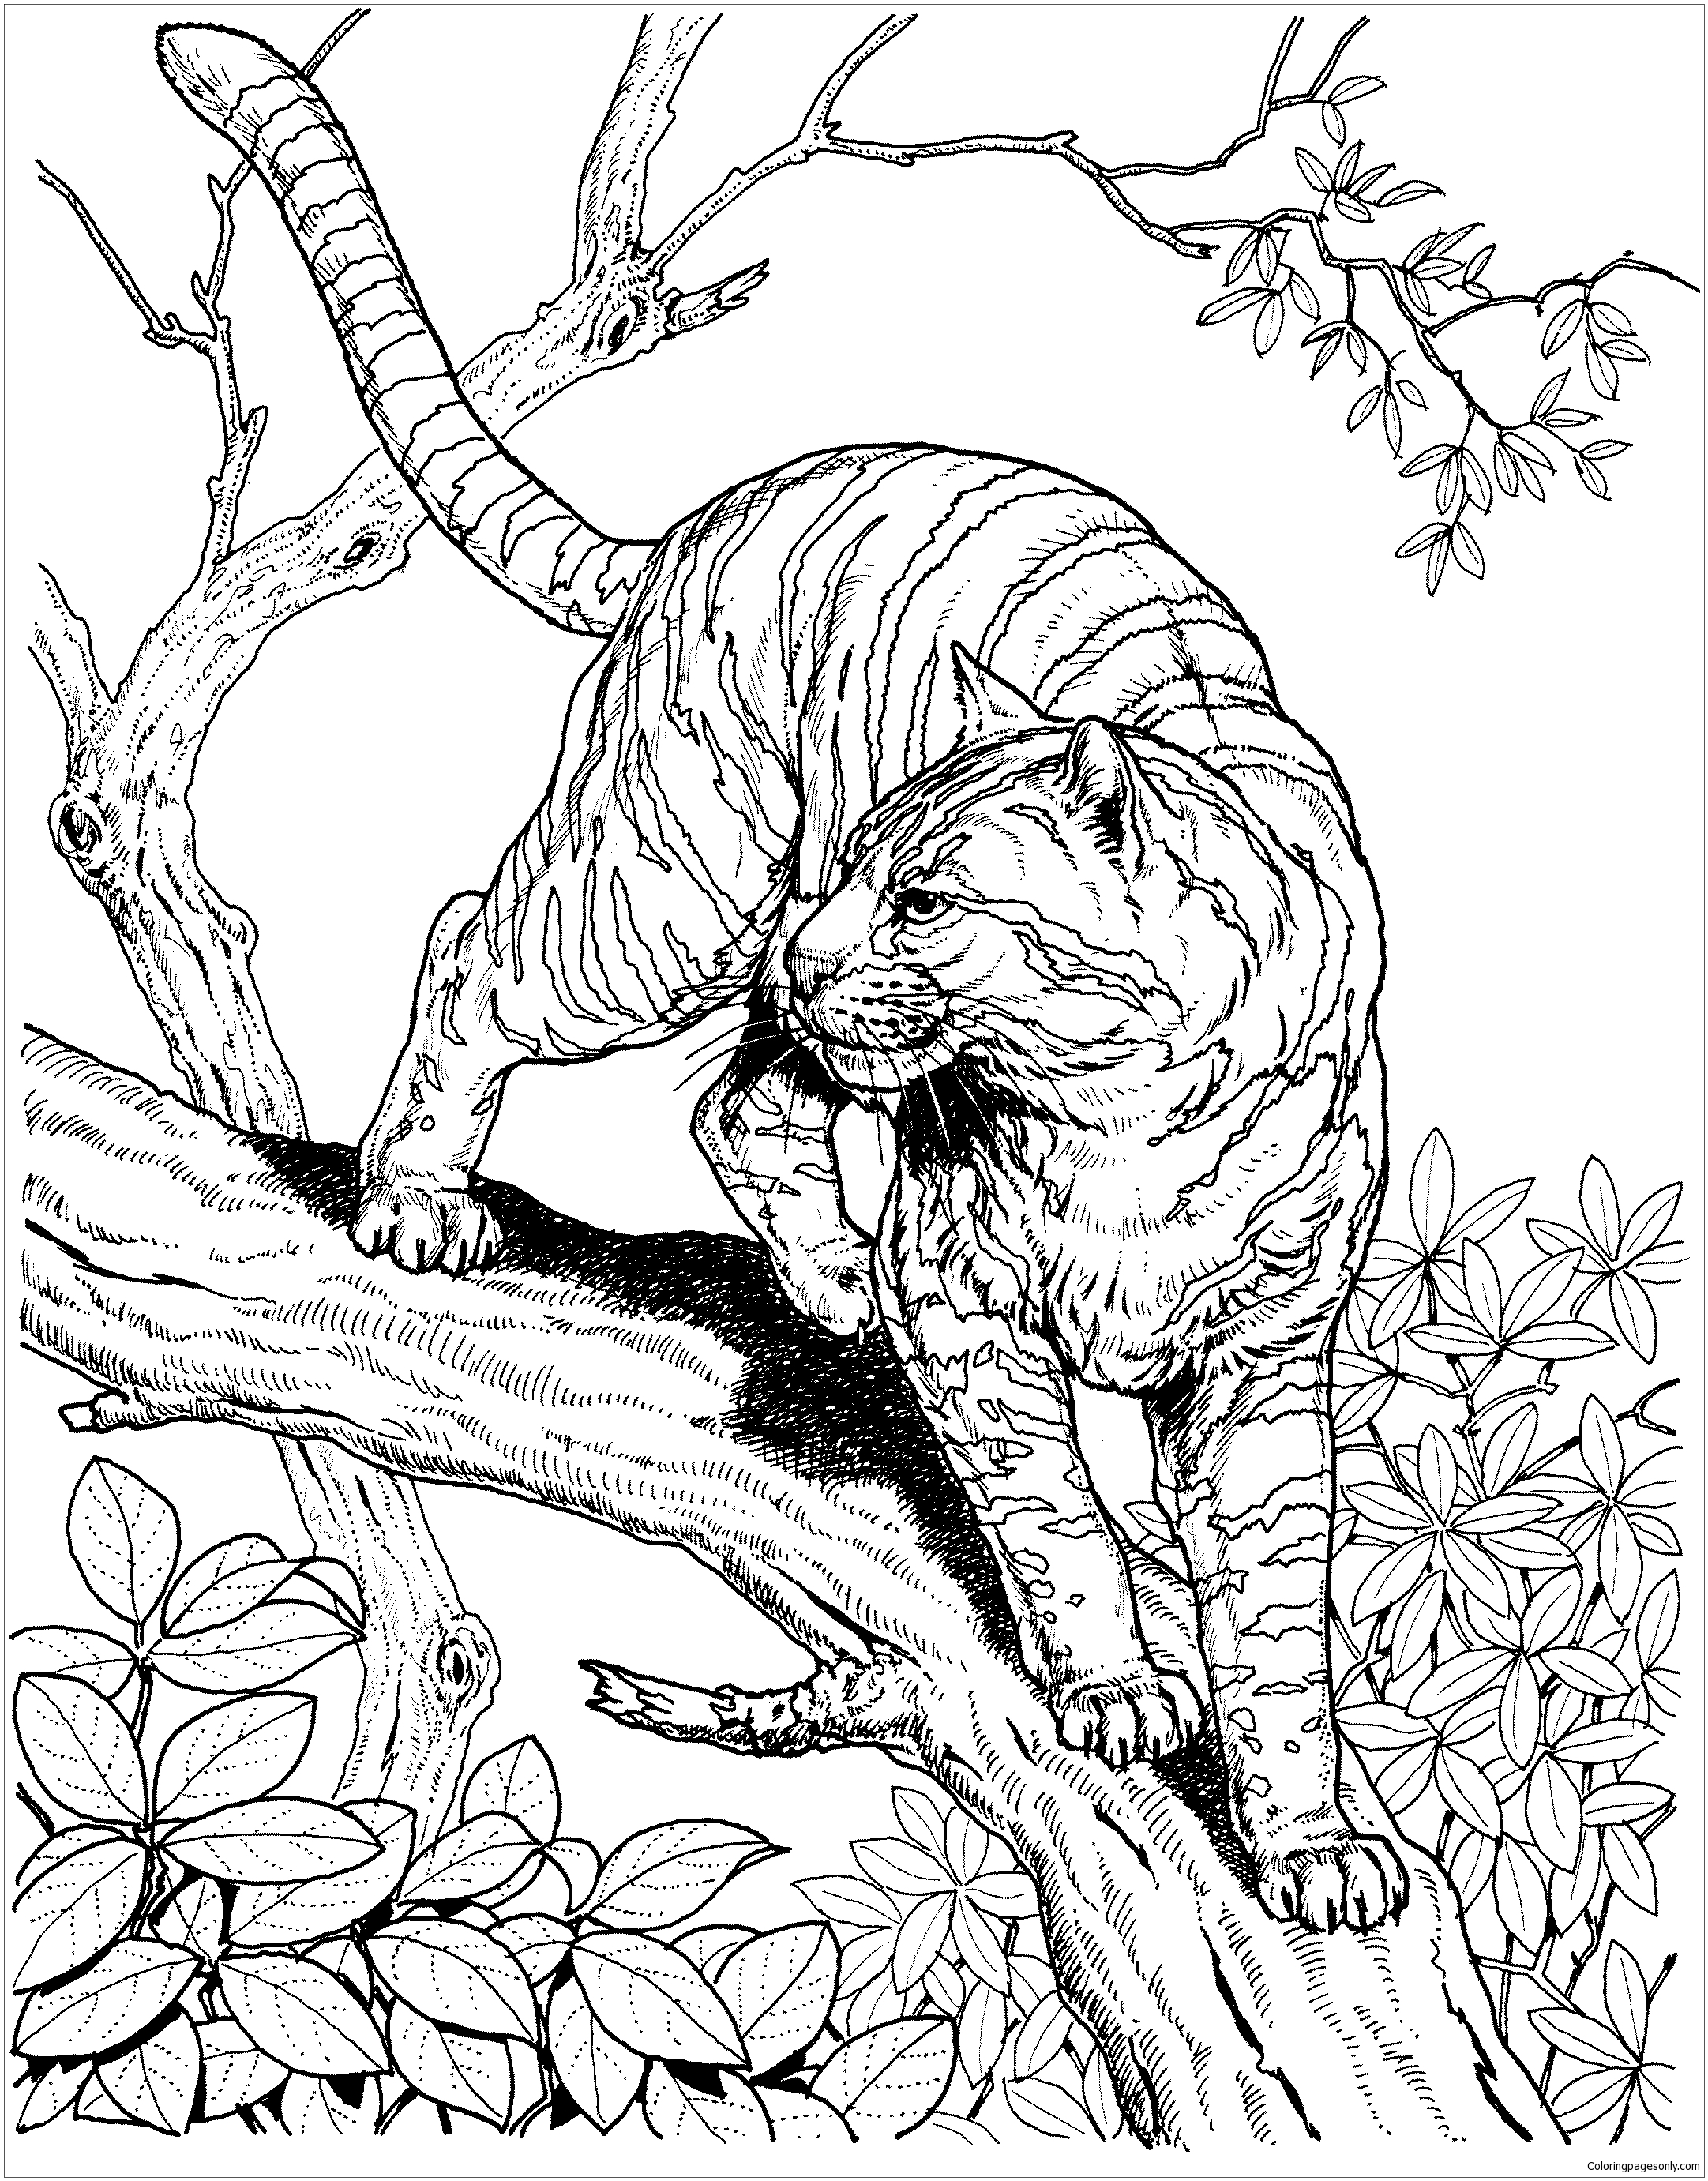 hard-animal-2-coloring-pages-hard-coloring-pages-coloring-pages-for-kids-and-adults